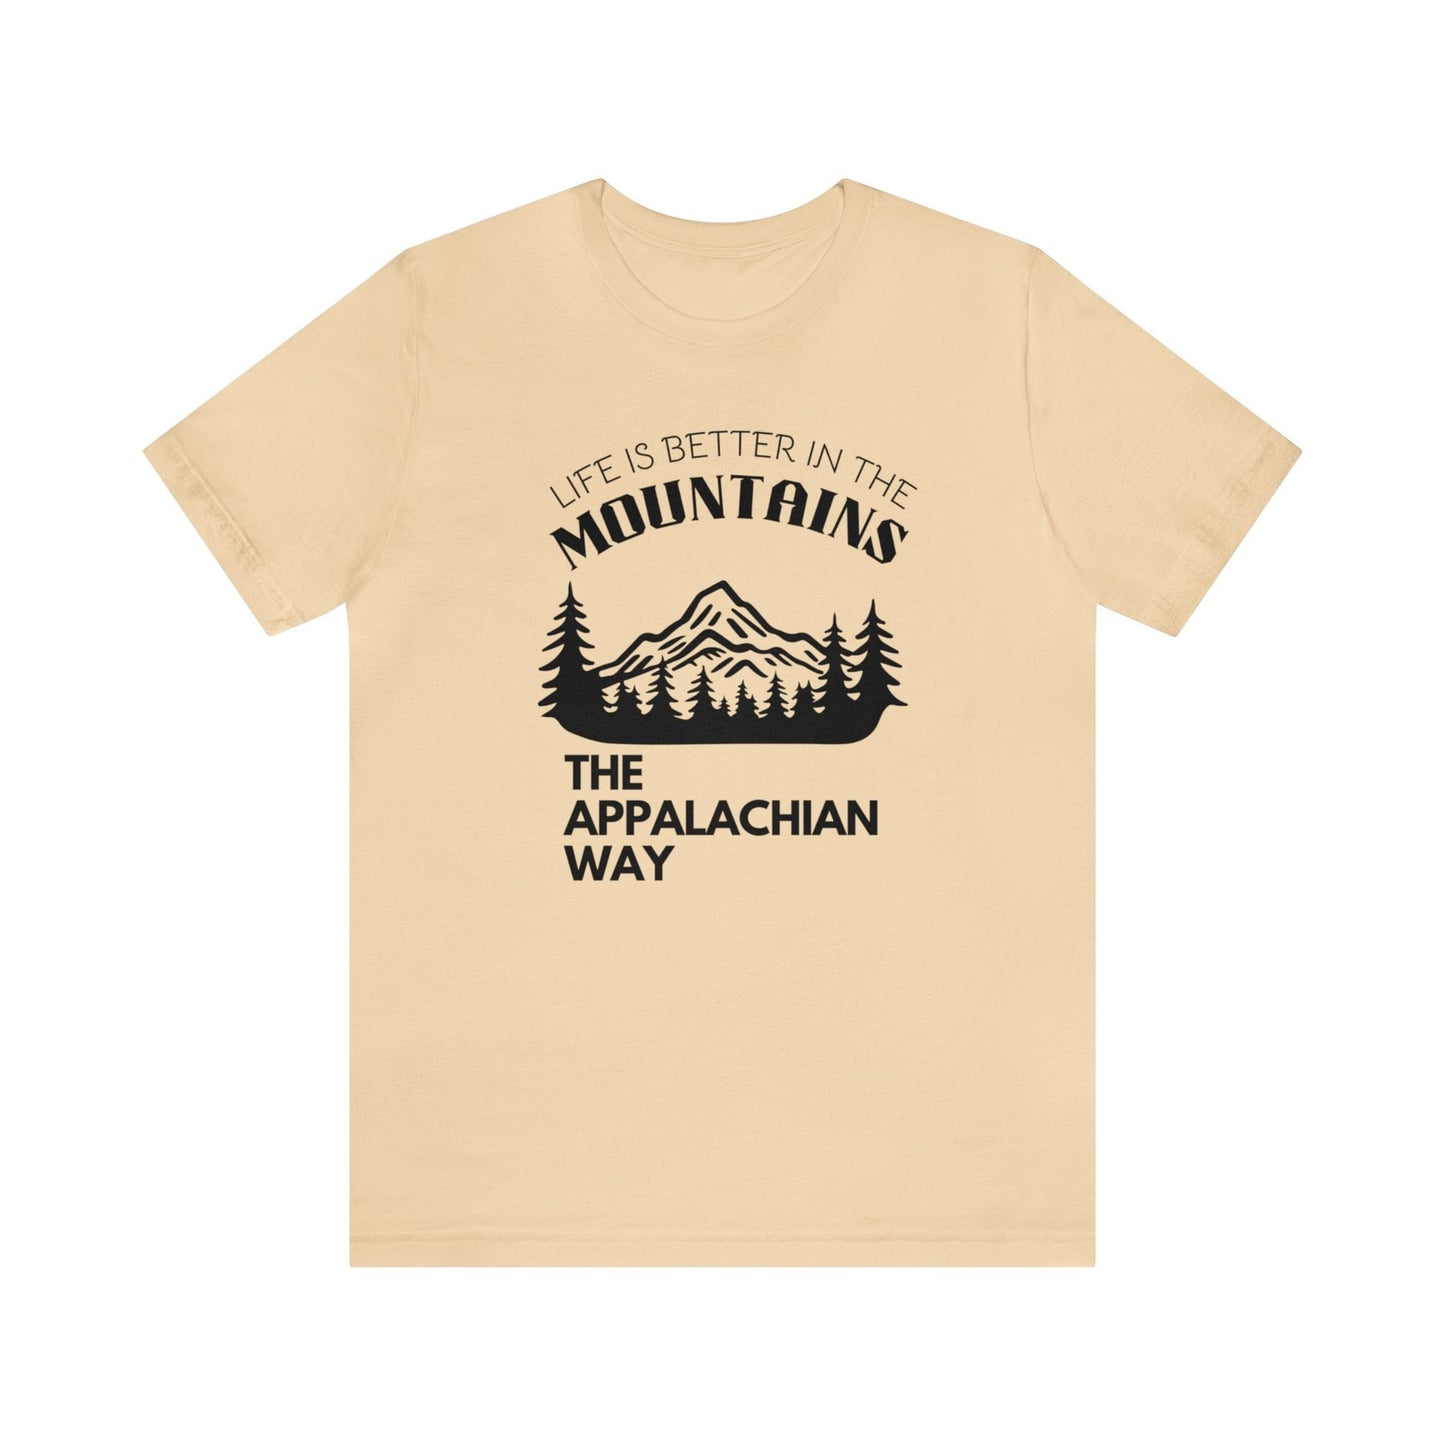 Life Is Better In The Mountains The Appalachian Way Short Sleeve Shirt | hiking, outdoor apparel, gifts for him, cute nature shirt, unisex